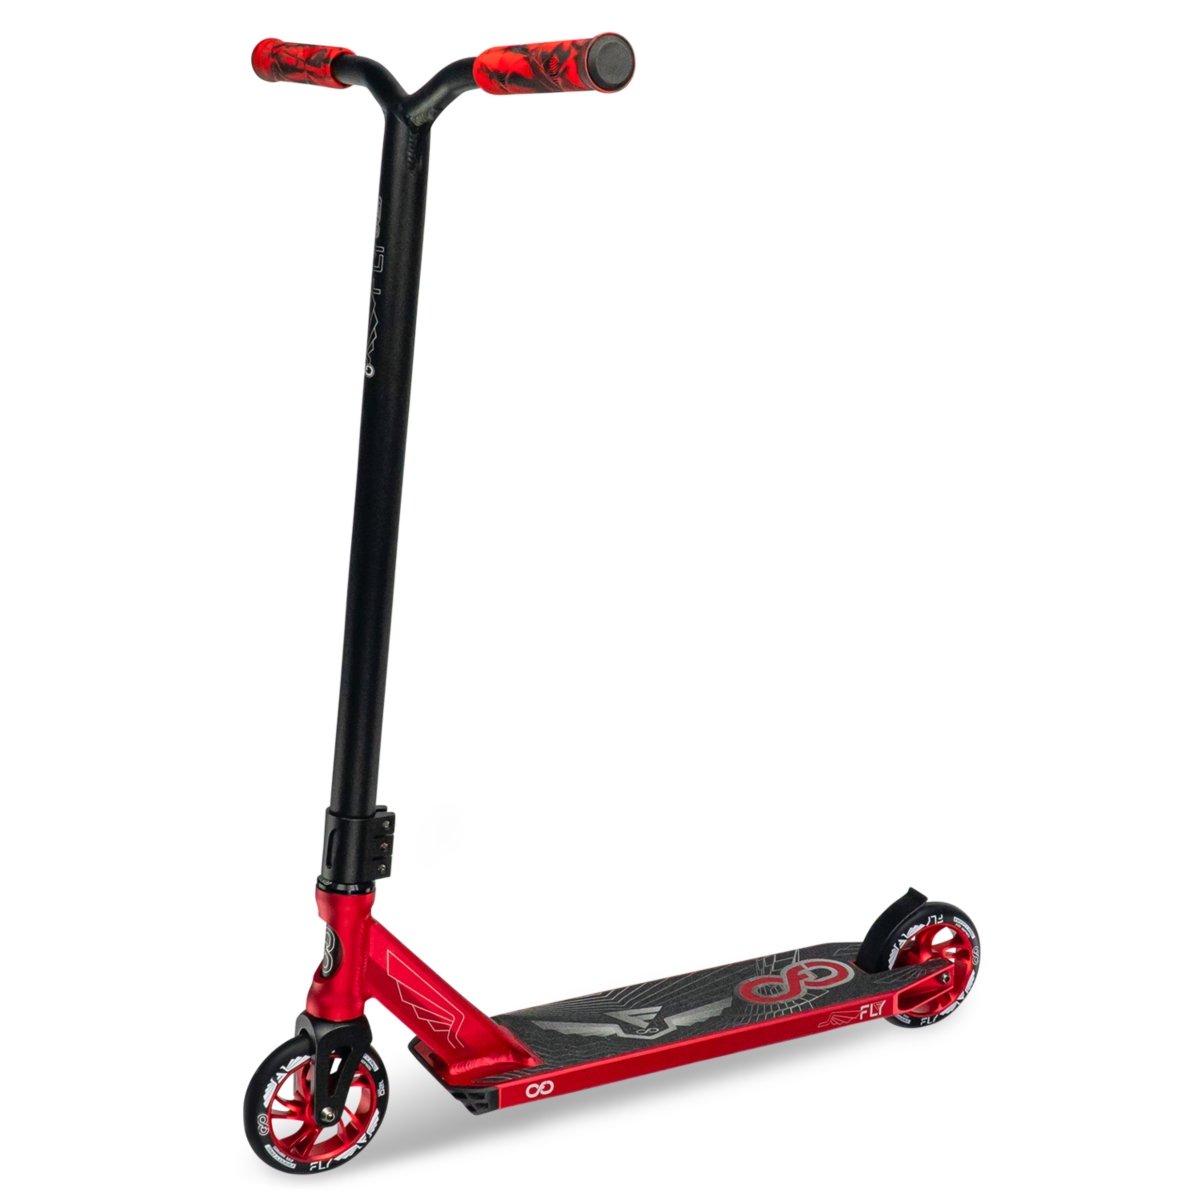 Fly Kick Scooter By Fun Trick Scooters For Stunts On The Street And Skate Park - Black